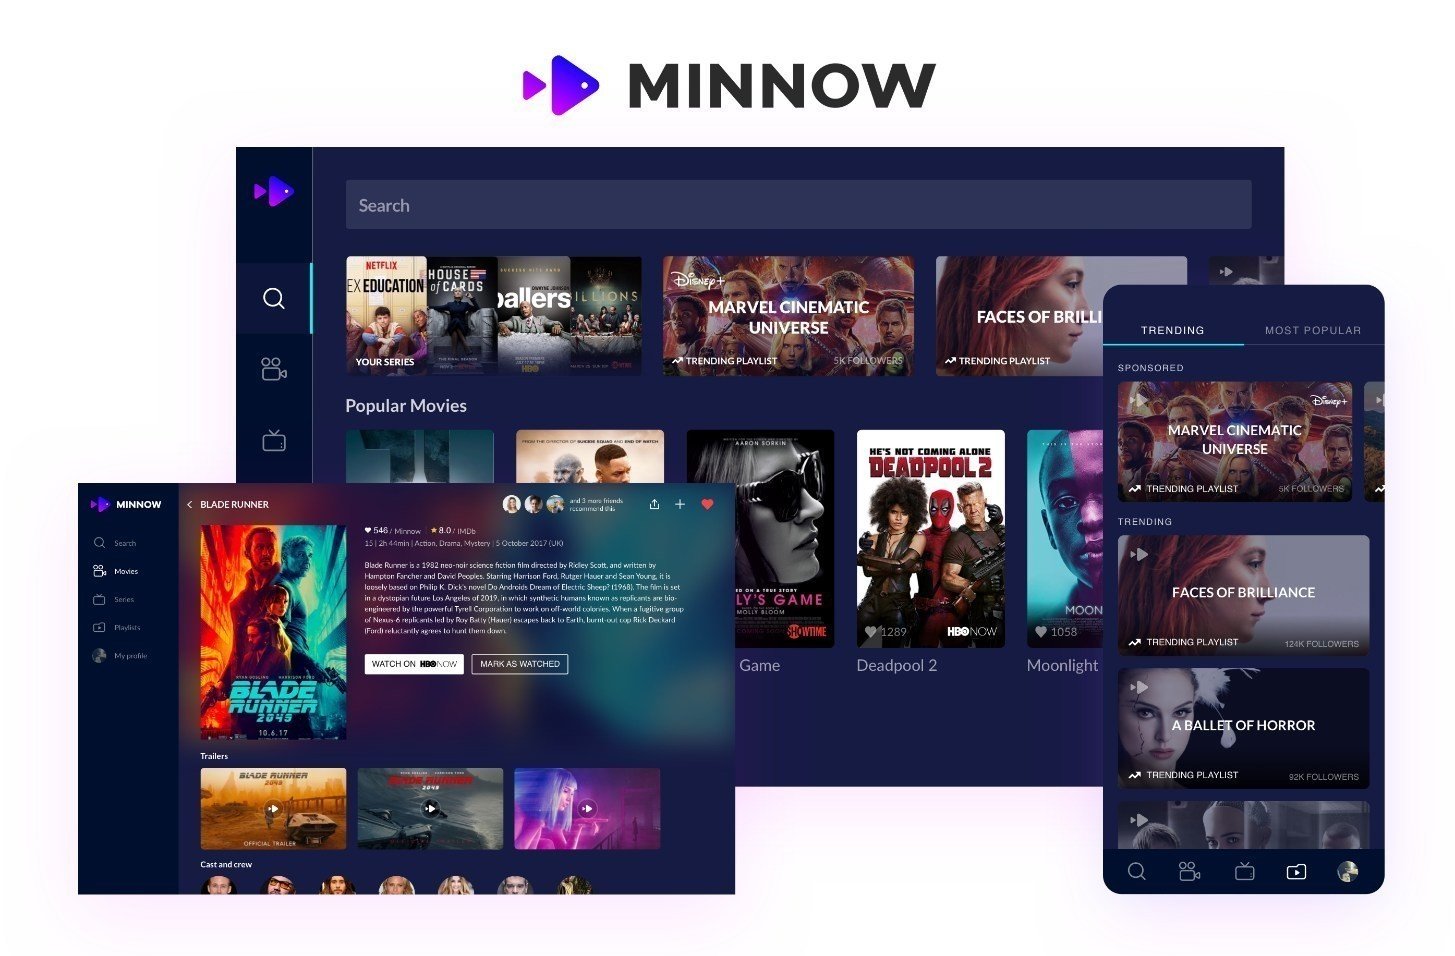 Free Minnow video guide app combines streaming platforms • Home Theater Forum